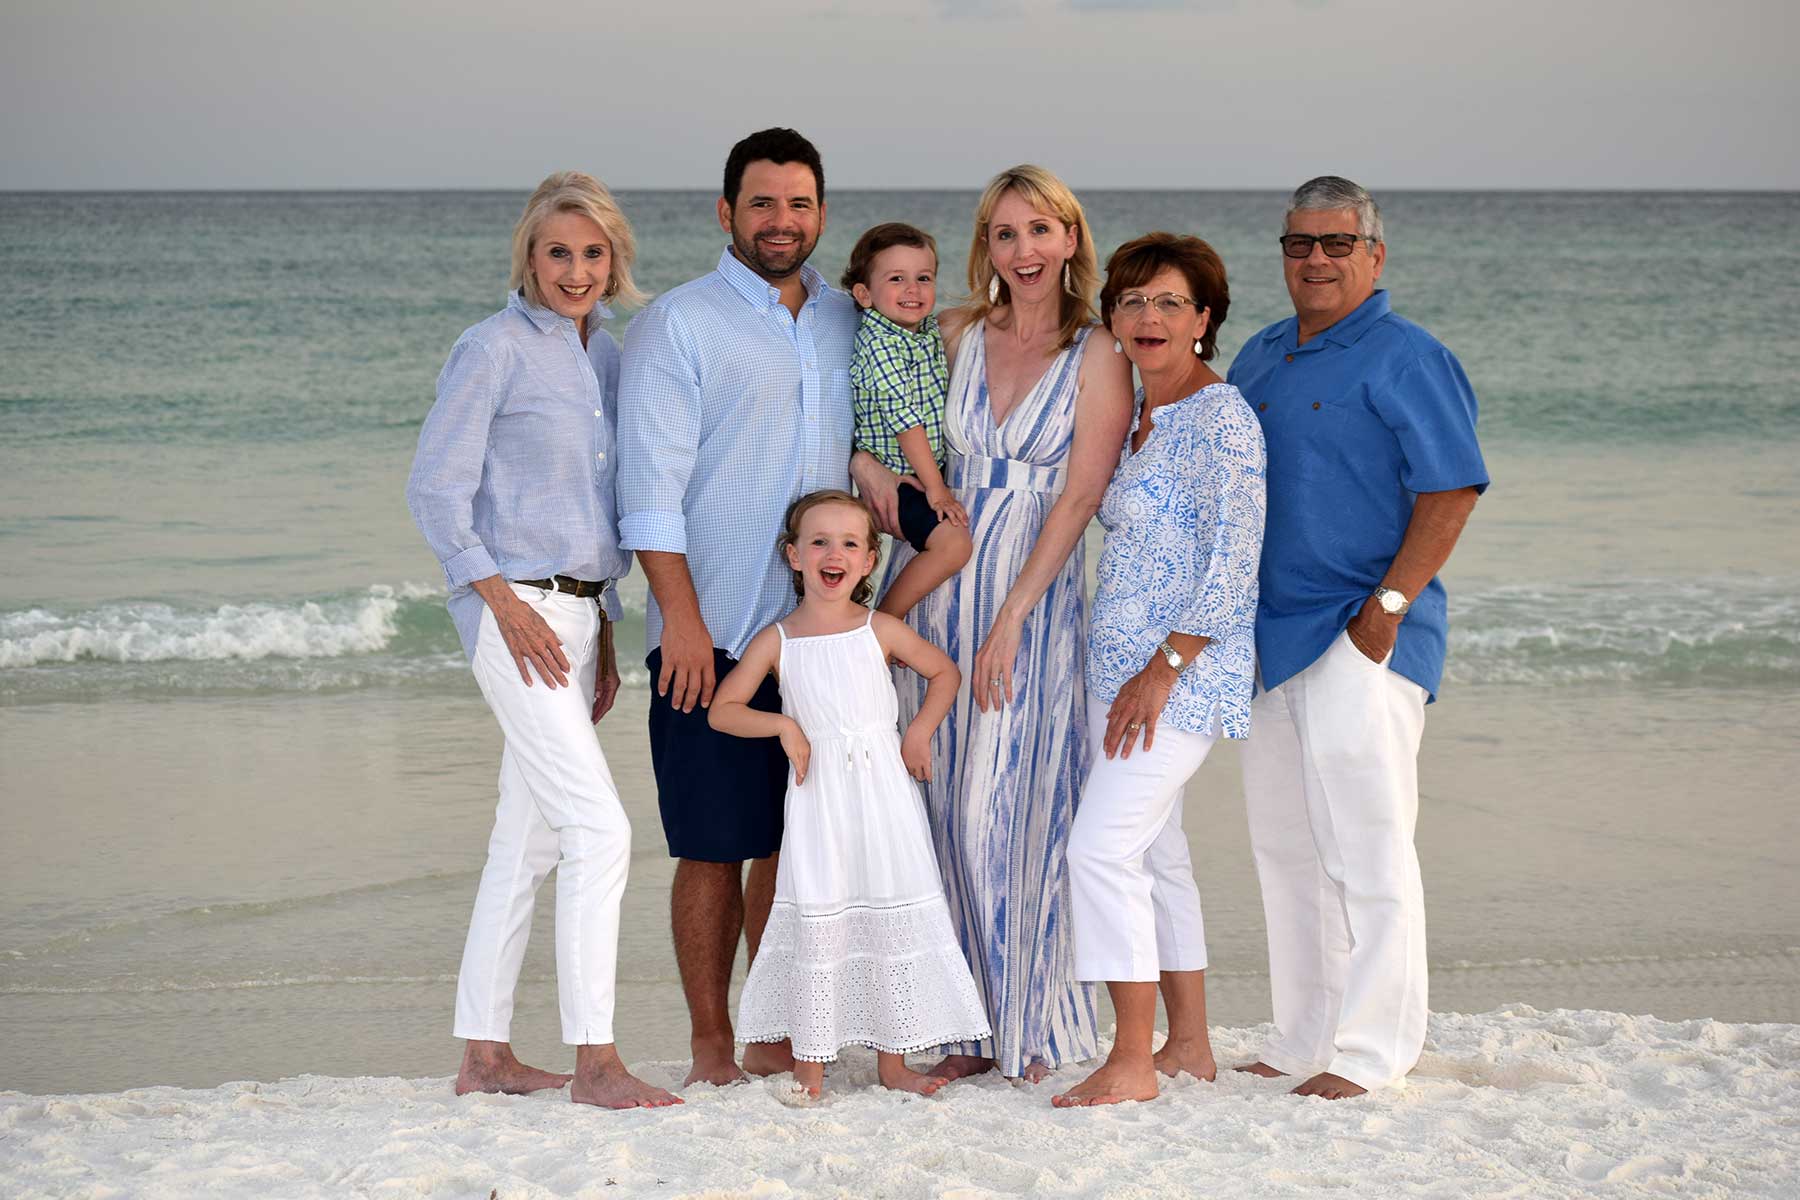 Family Photos at the Beach | Beach photoshoot family, Family beach pictures,  Lifestyle photography family